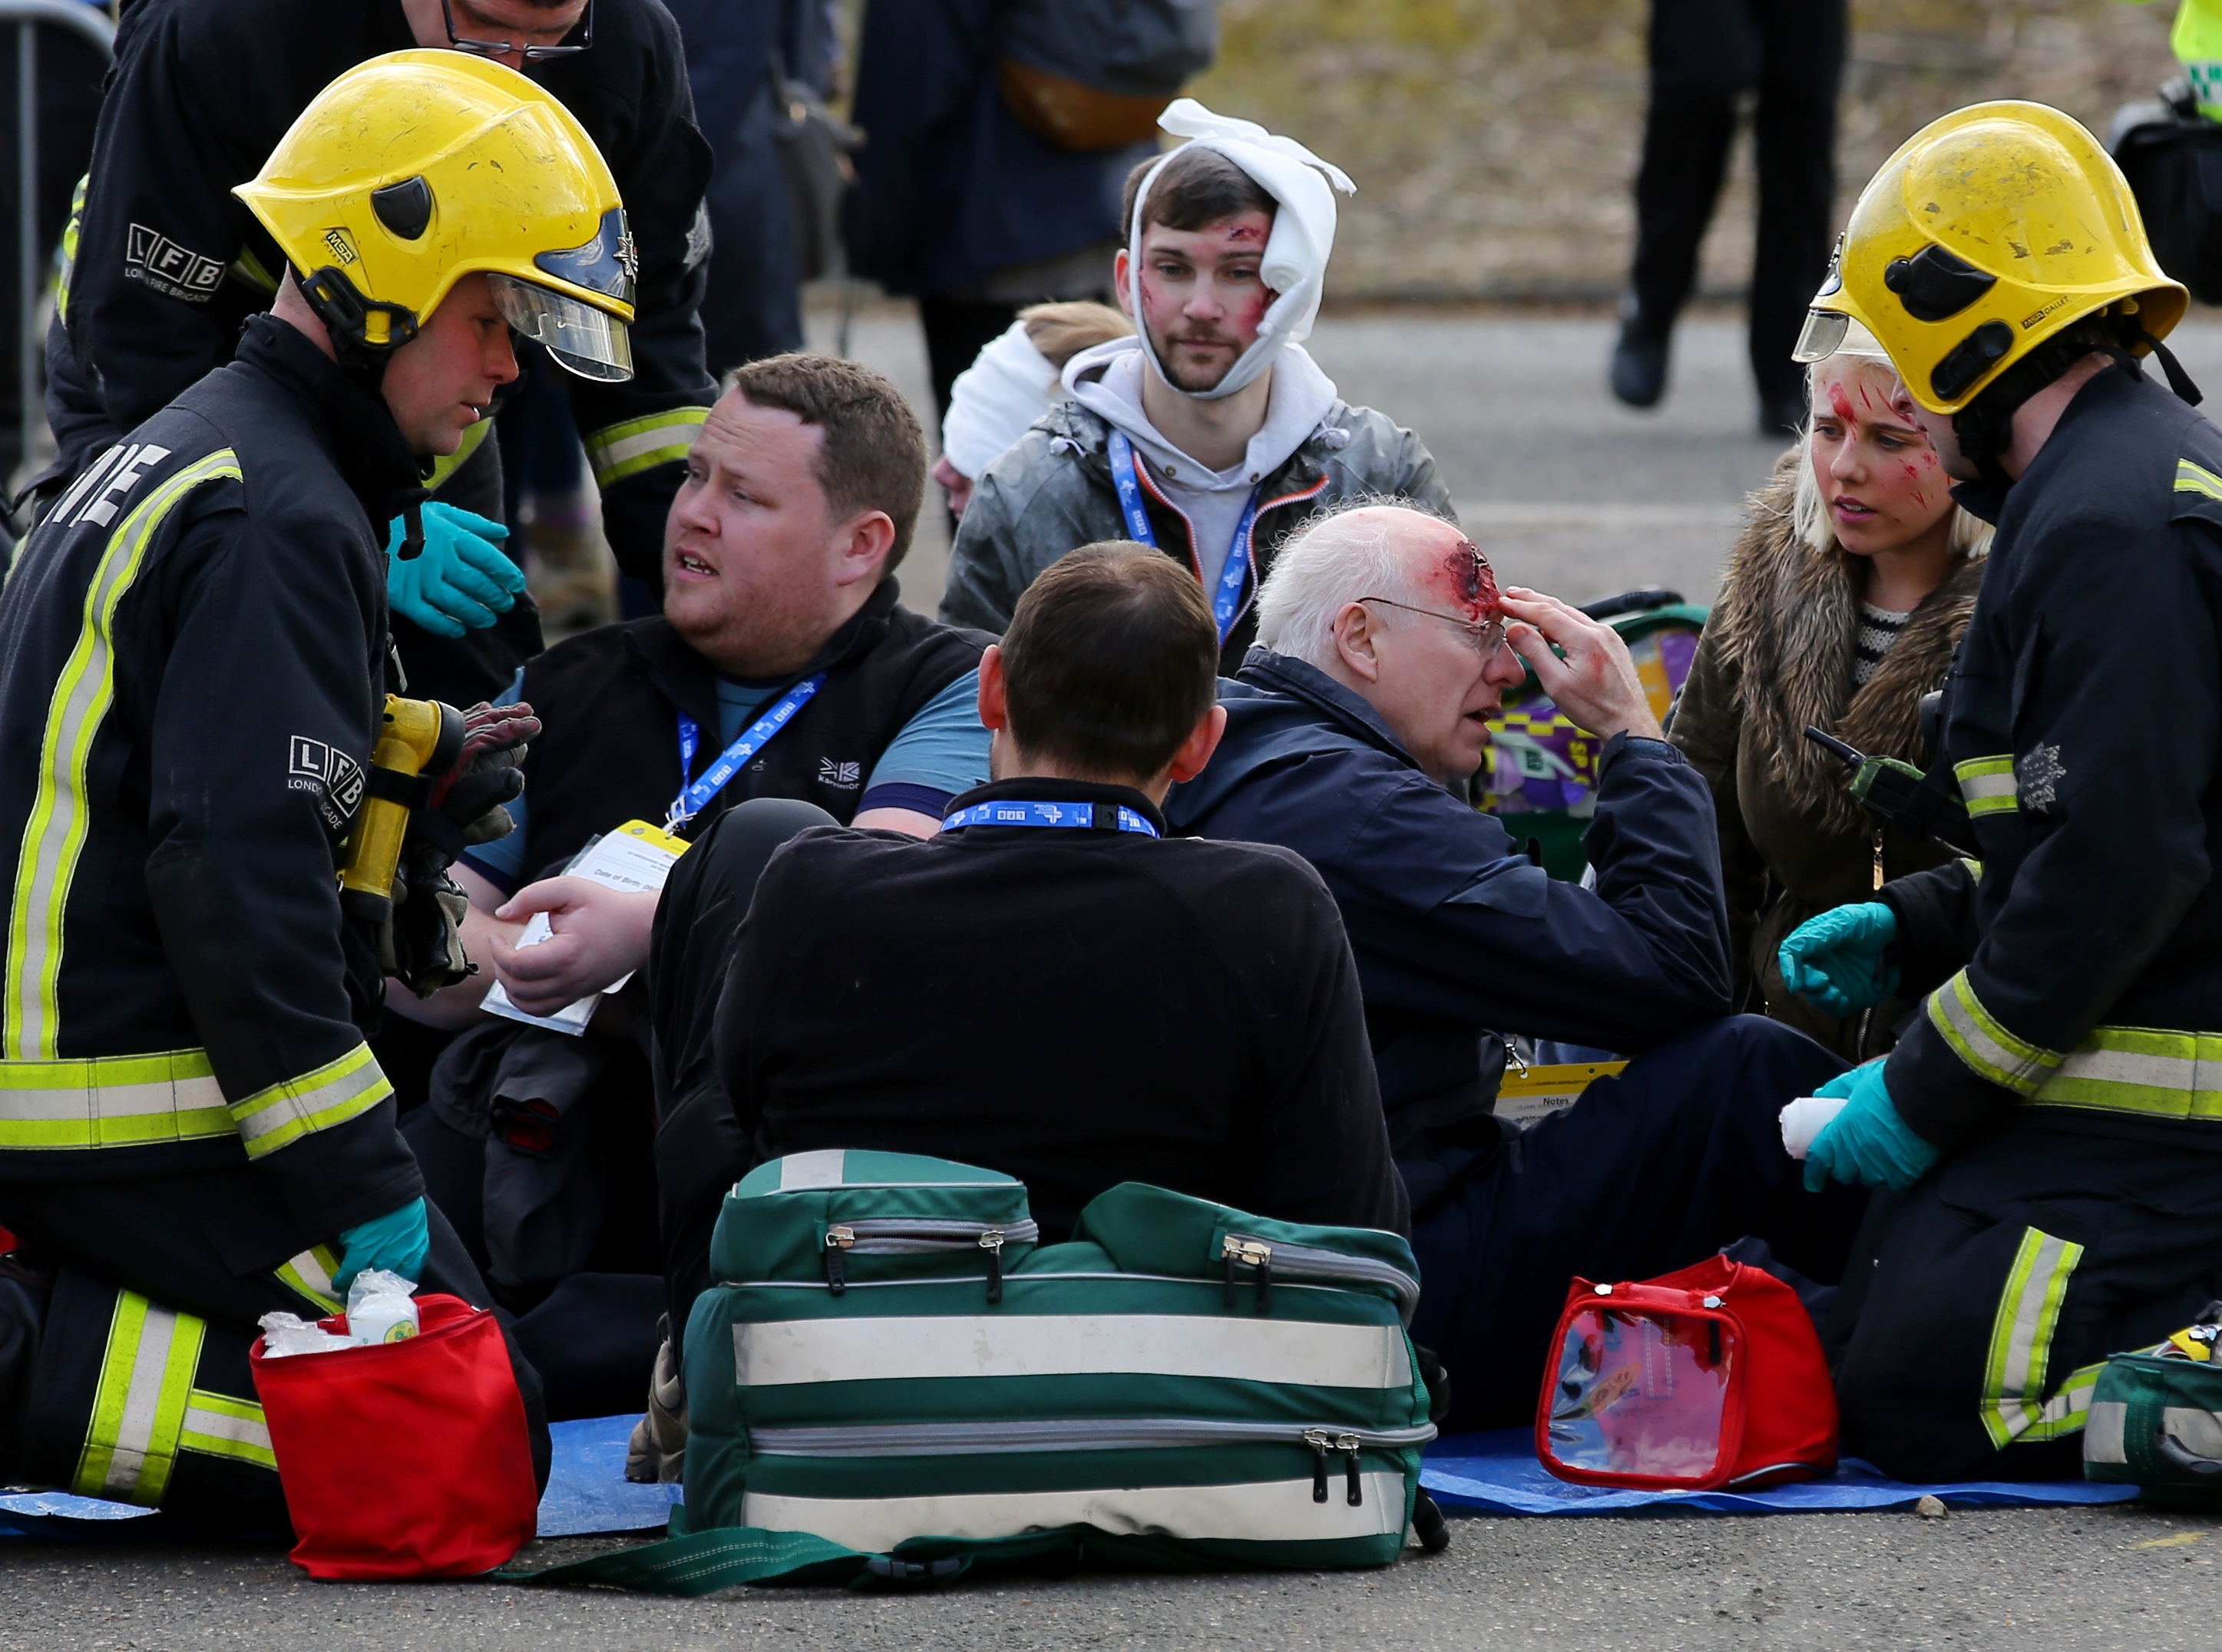 Actors play the role of disaster victims during Exercise Unified Response, an emergency services training exercise, at Littlebrook Power Station in Dartford, Kent. PRESS ASSOCIATION Photo. Picture date: Monday February 29, 2016. The staged scenario is being carried out to prepare specialist emergency crews for a large-scale operation